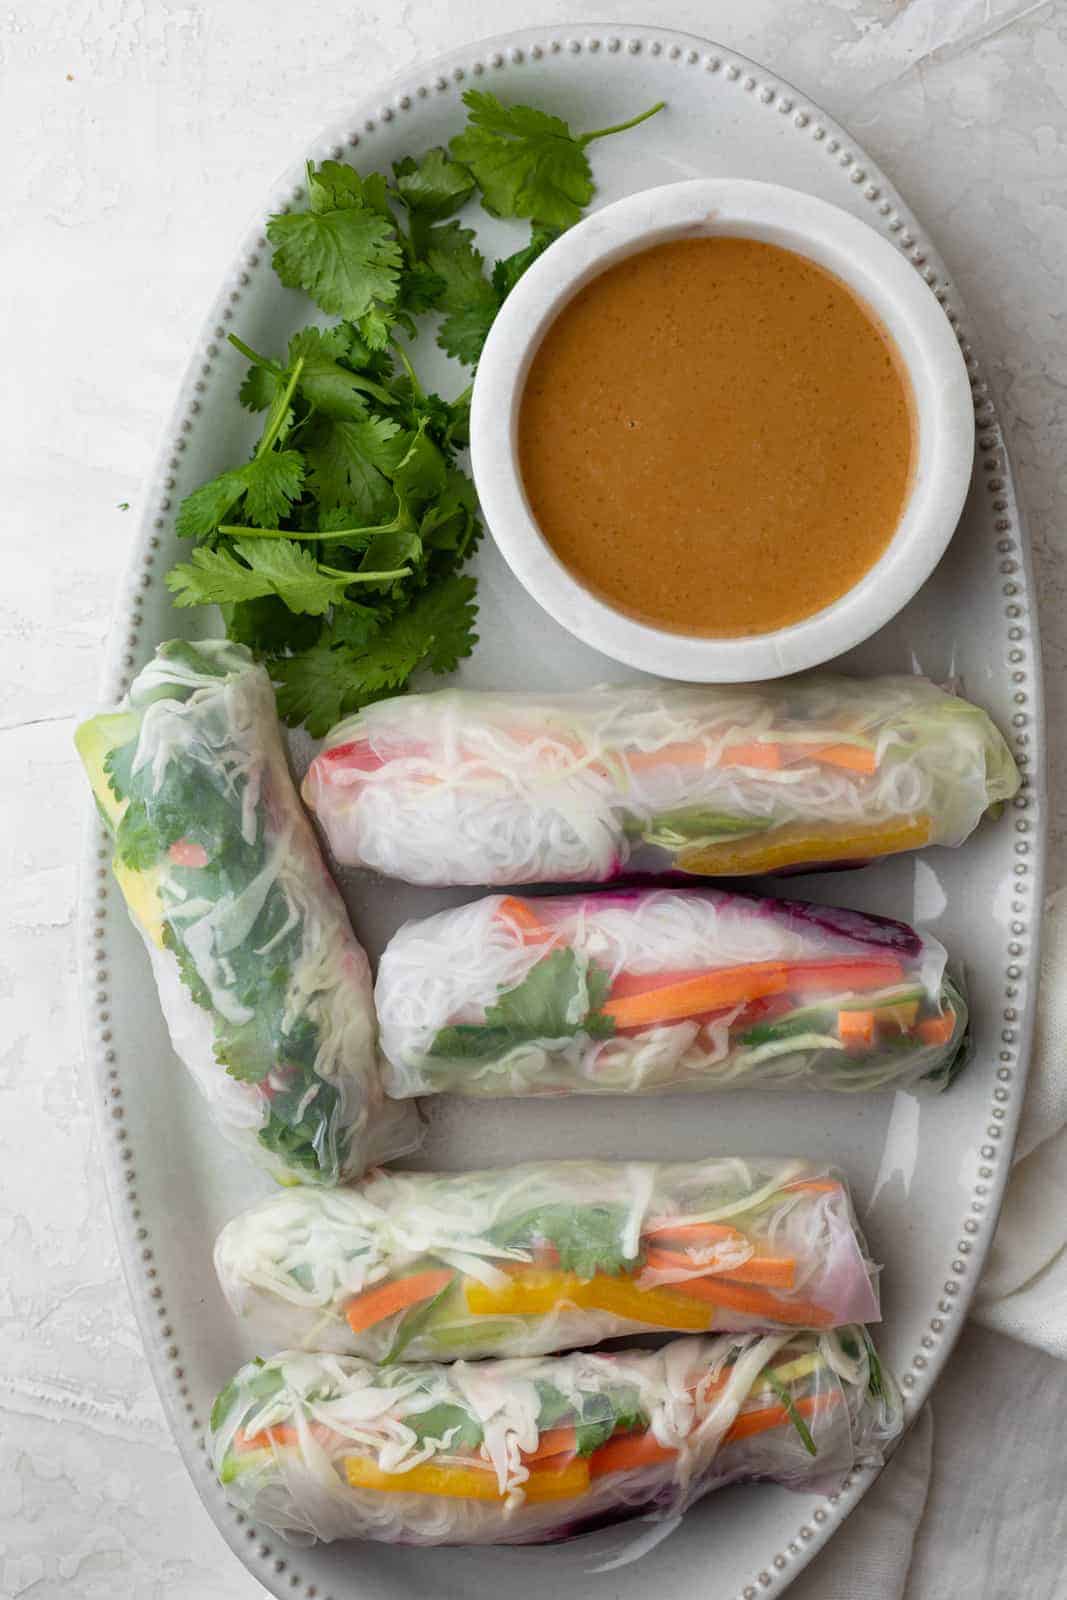 Platter of Vietnamese vegetable spring rolls with peanut dipping sauce